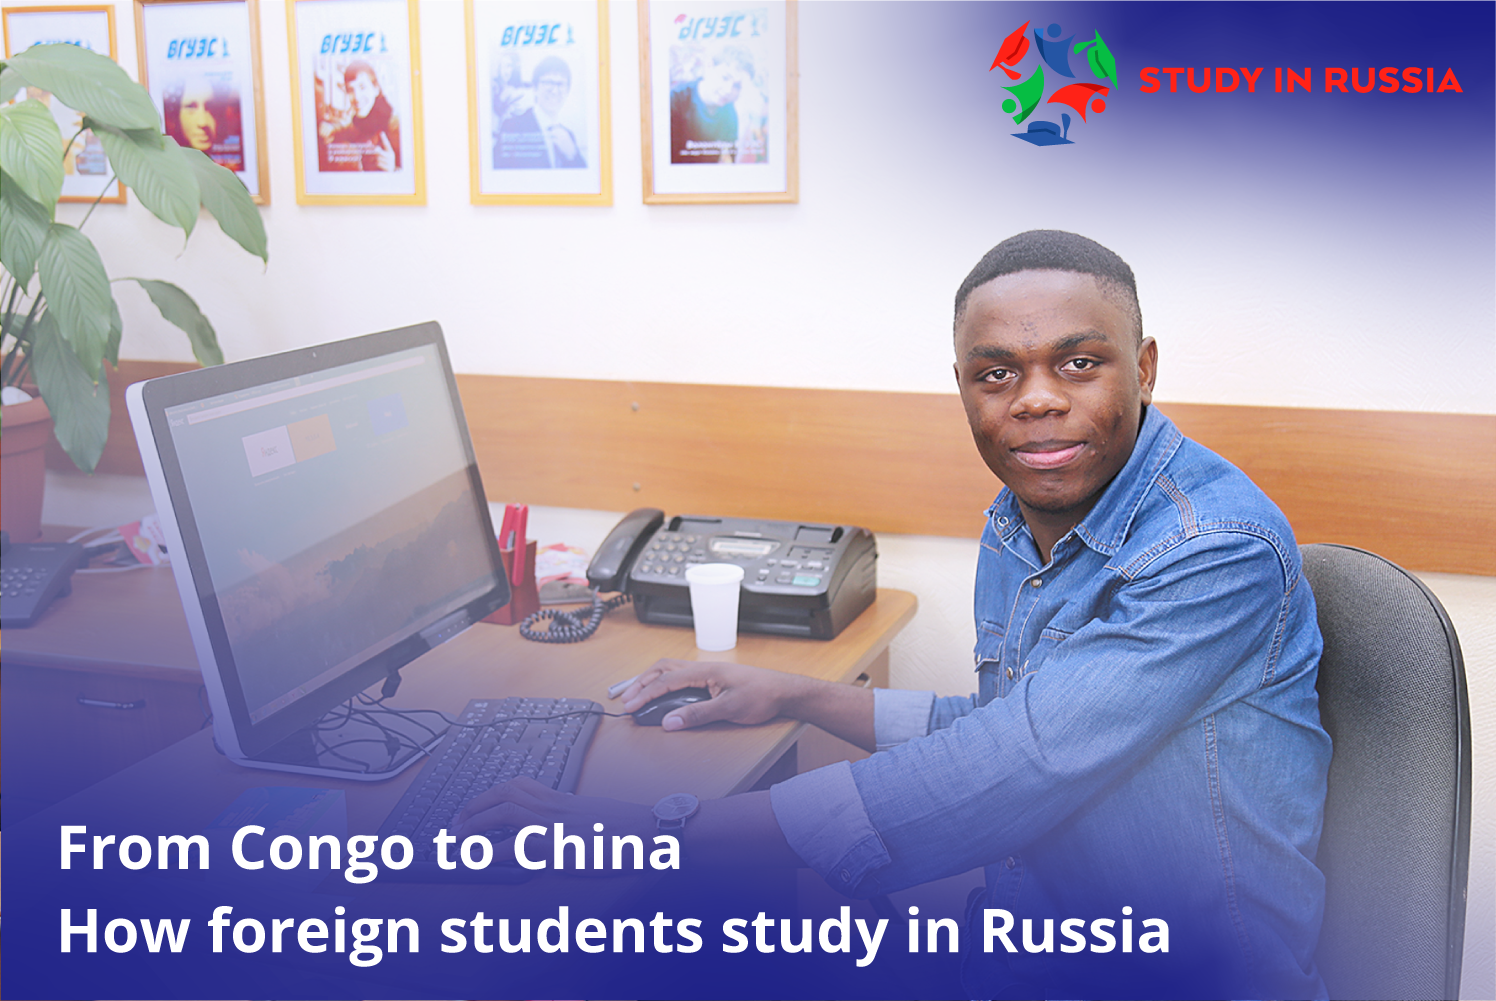 From Congo to China: how foreign students study in Russia